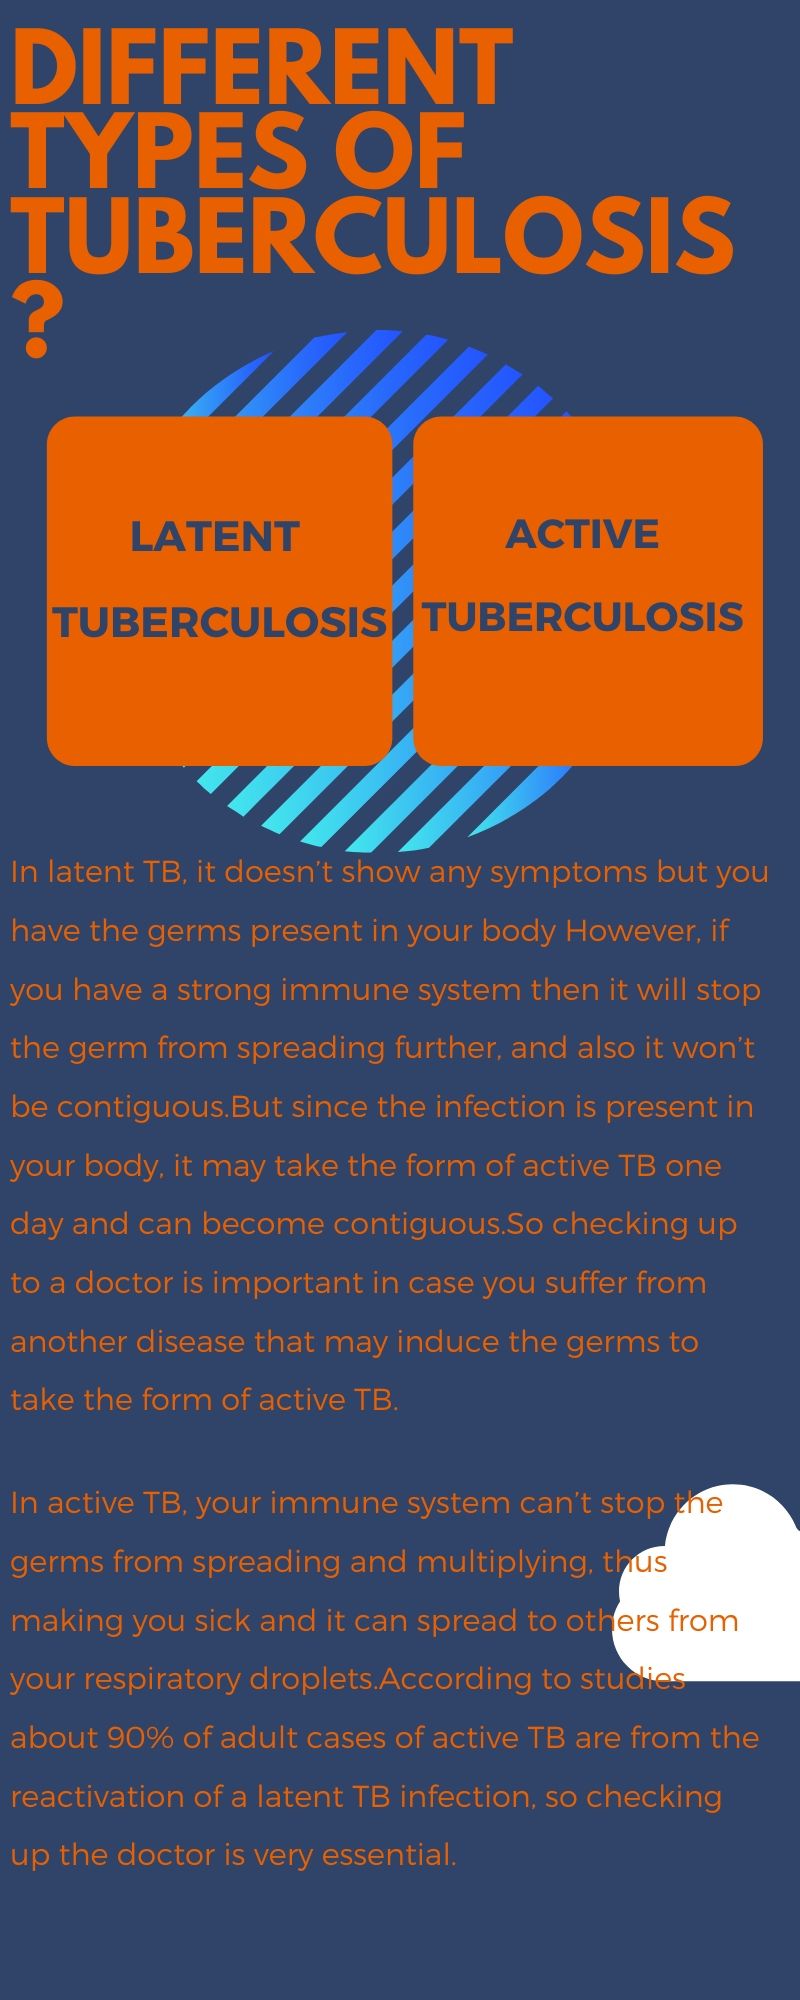 DIFFERENT-TYPES-OF-TUBERCULOSIS info-graphics